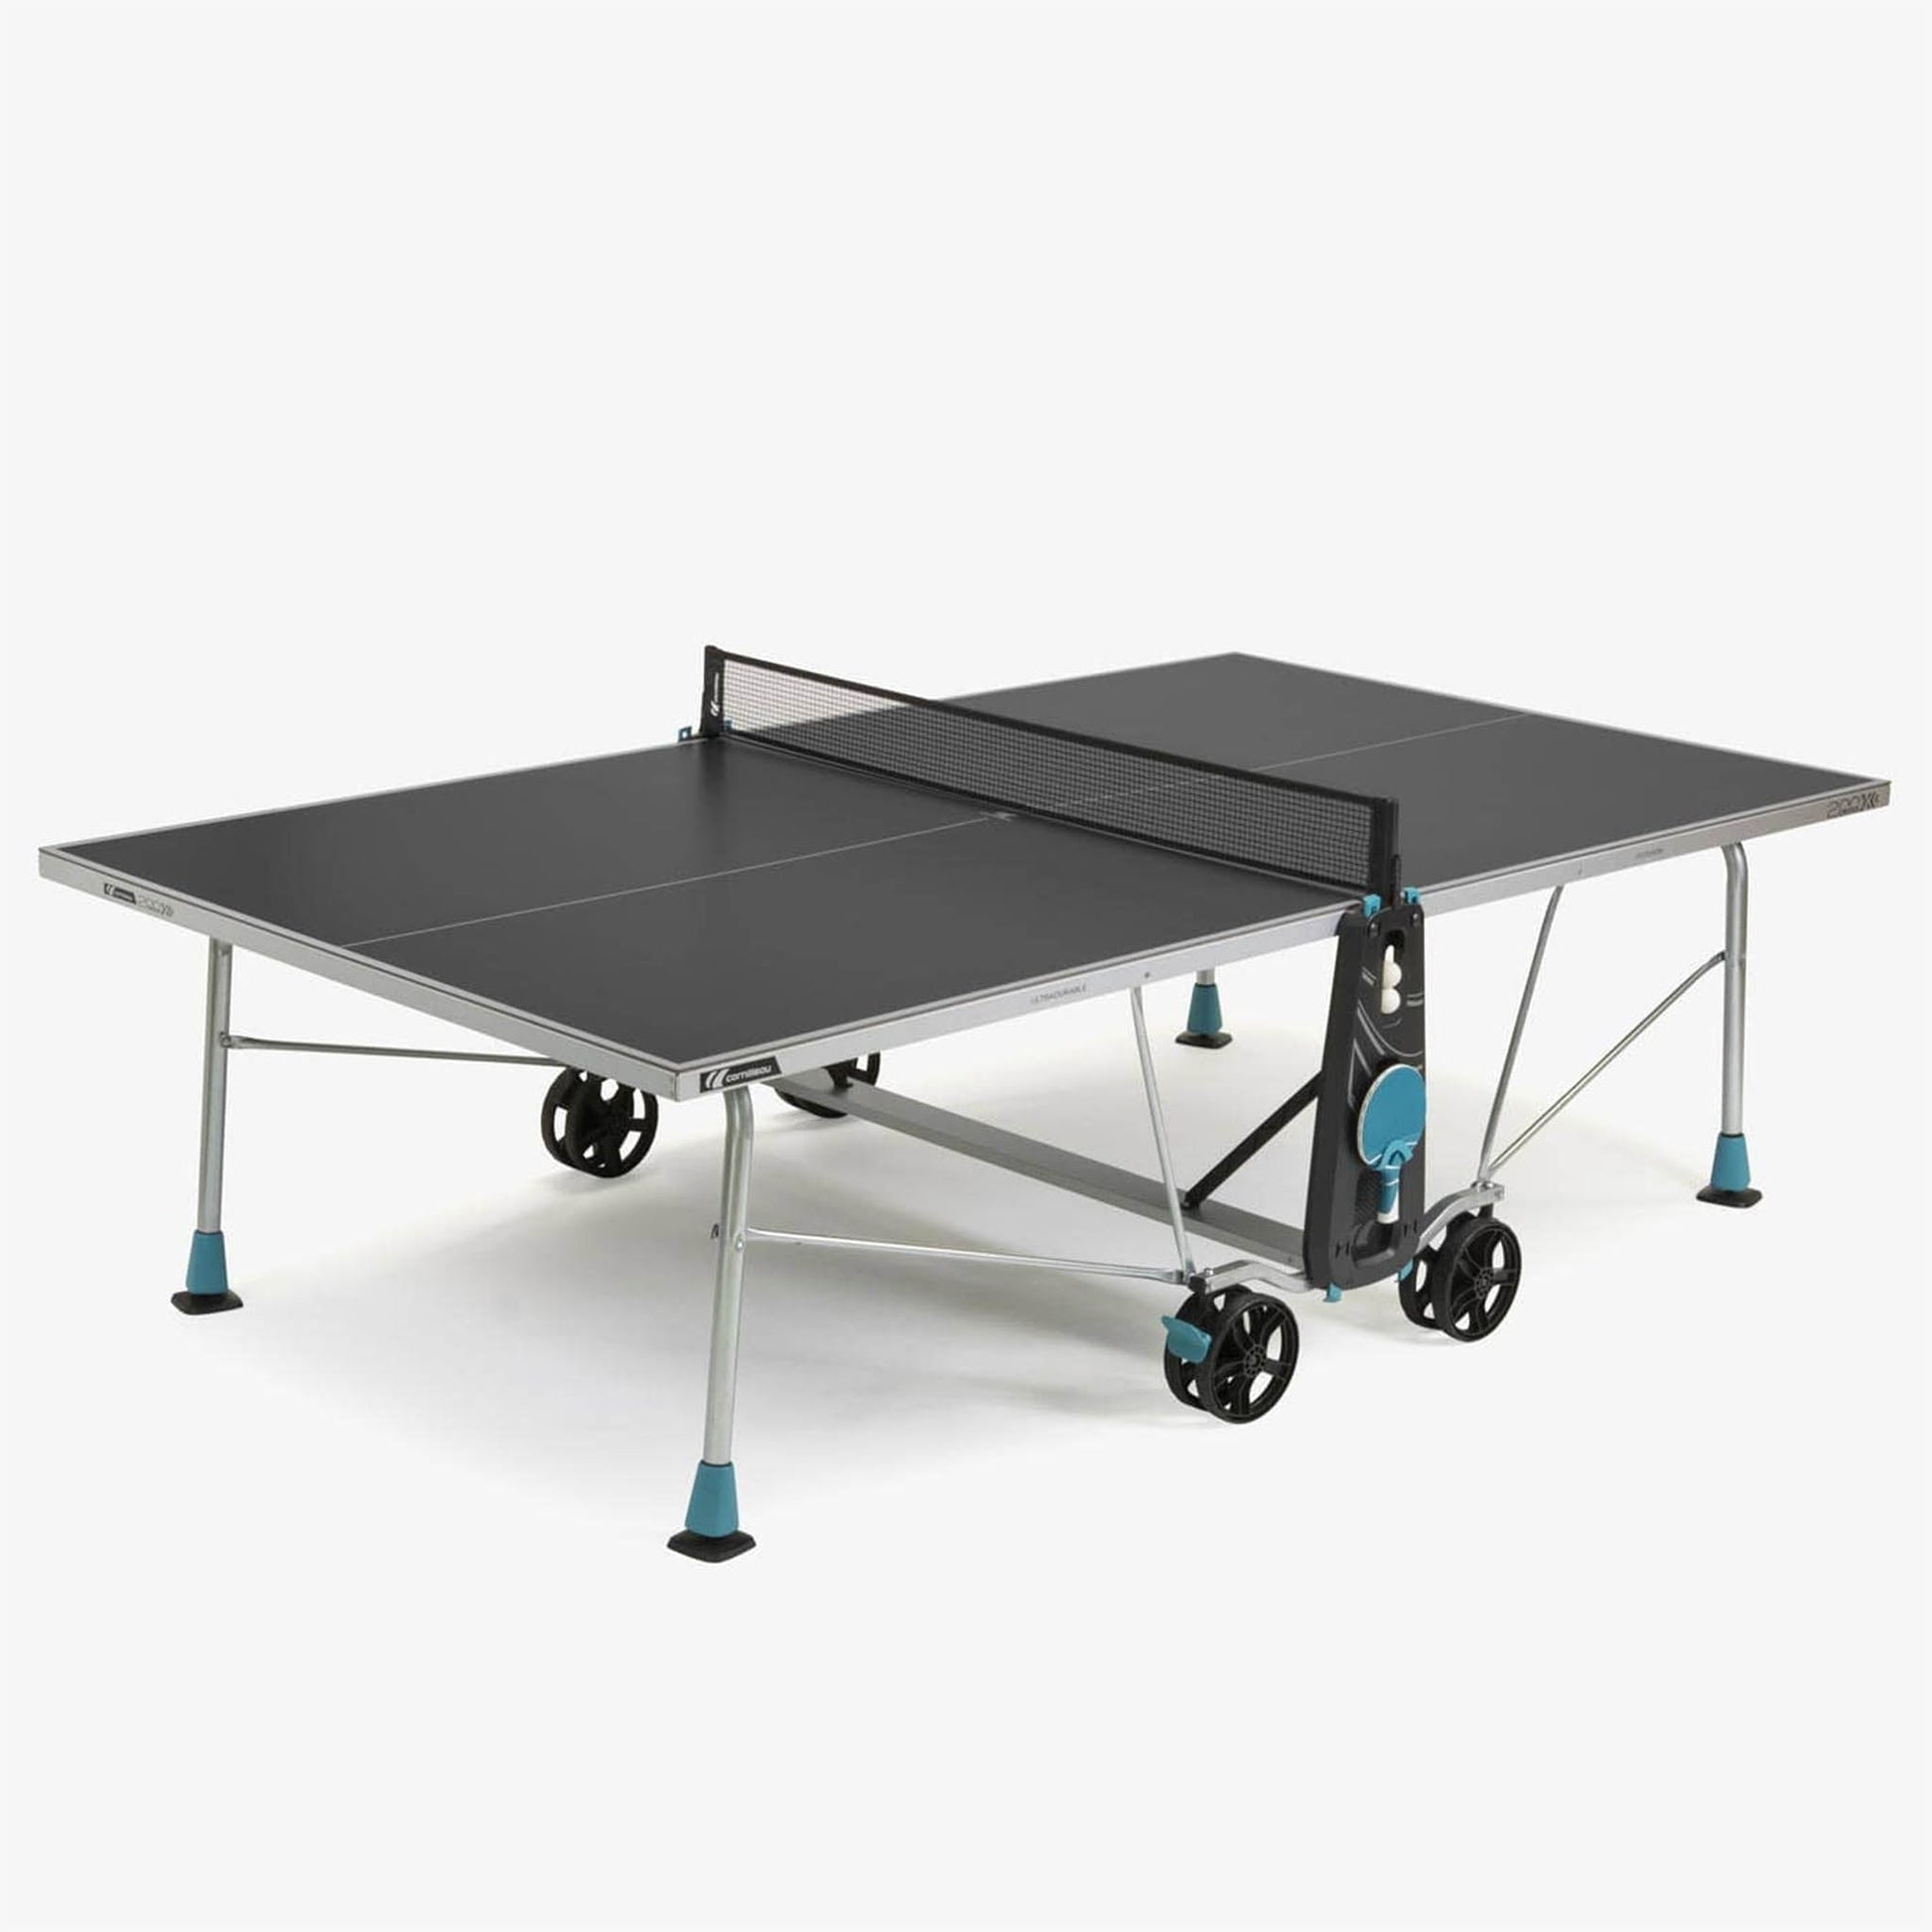 200X Outdoor Table Tennis Table - Cornilleau Table Tennis Singapore Official Store